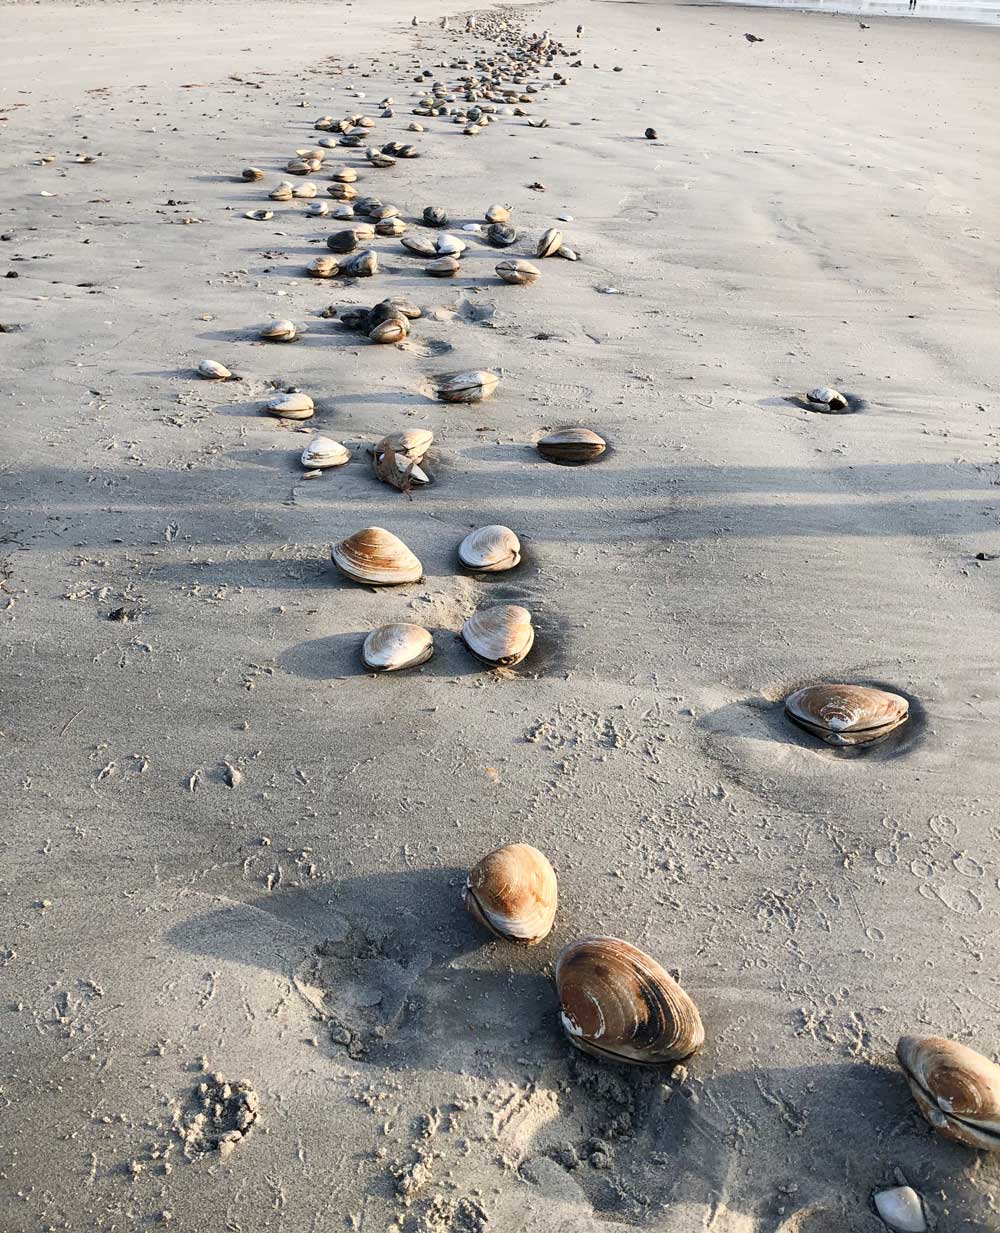 long line of clams on beach at low tide